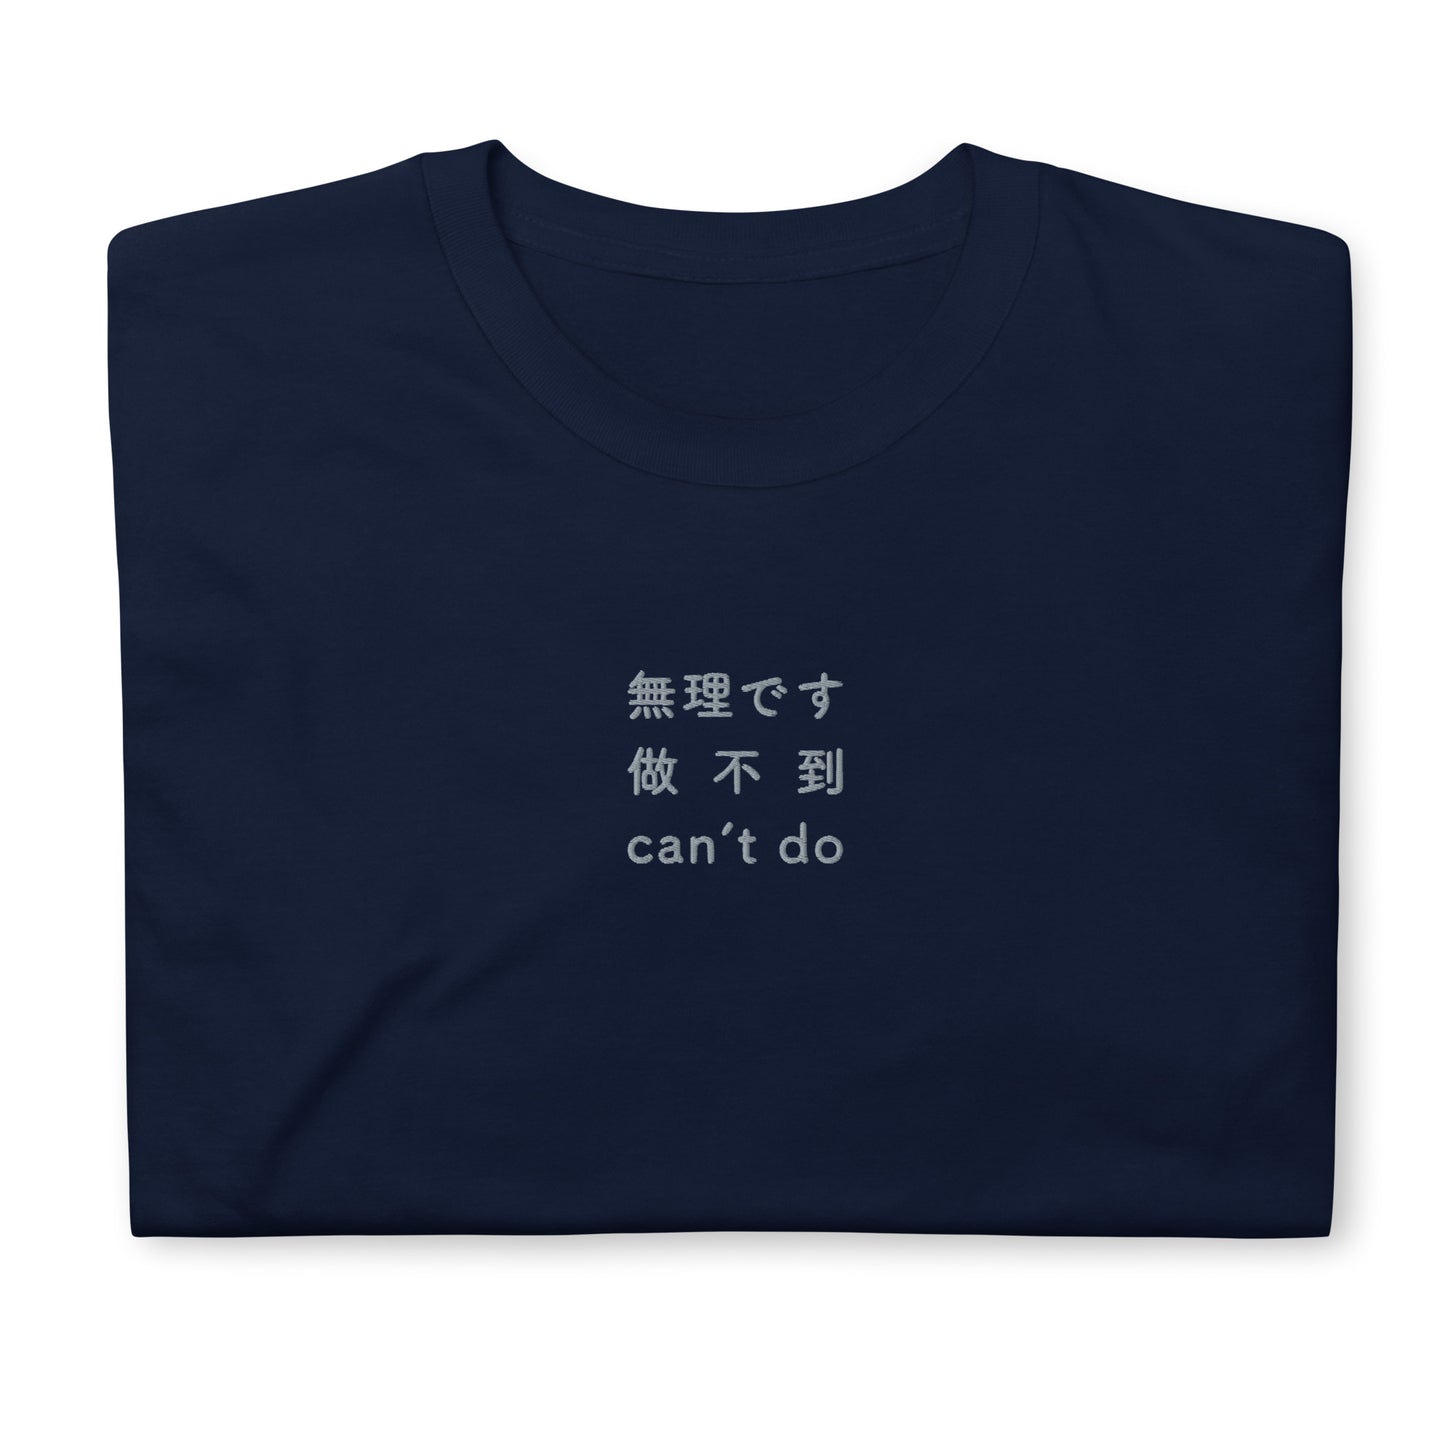 Navy High Quality Tee - Front Design with an Light Gray Embroidery "Can't Do" in Japanese, Chinese and English